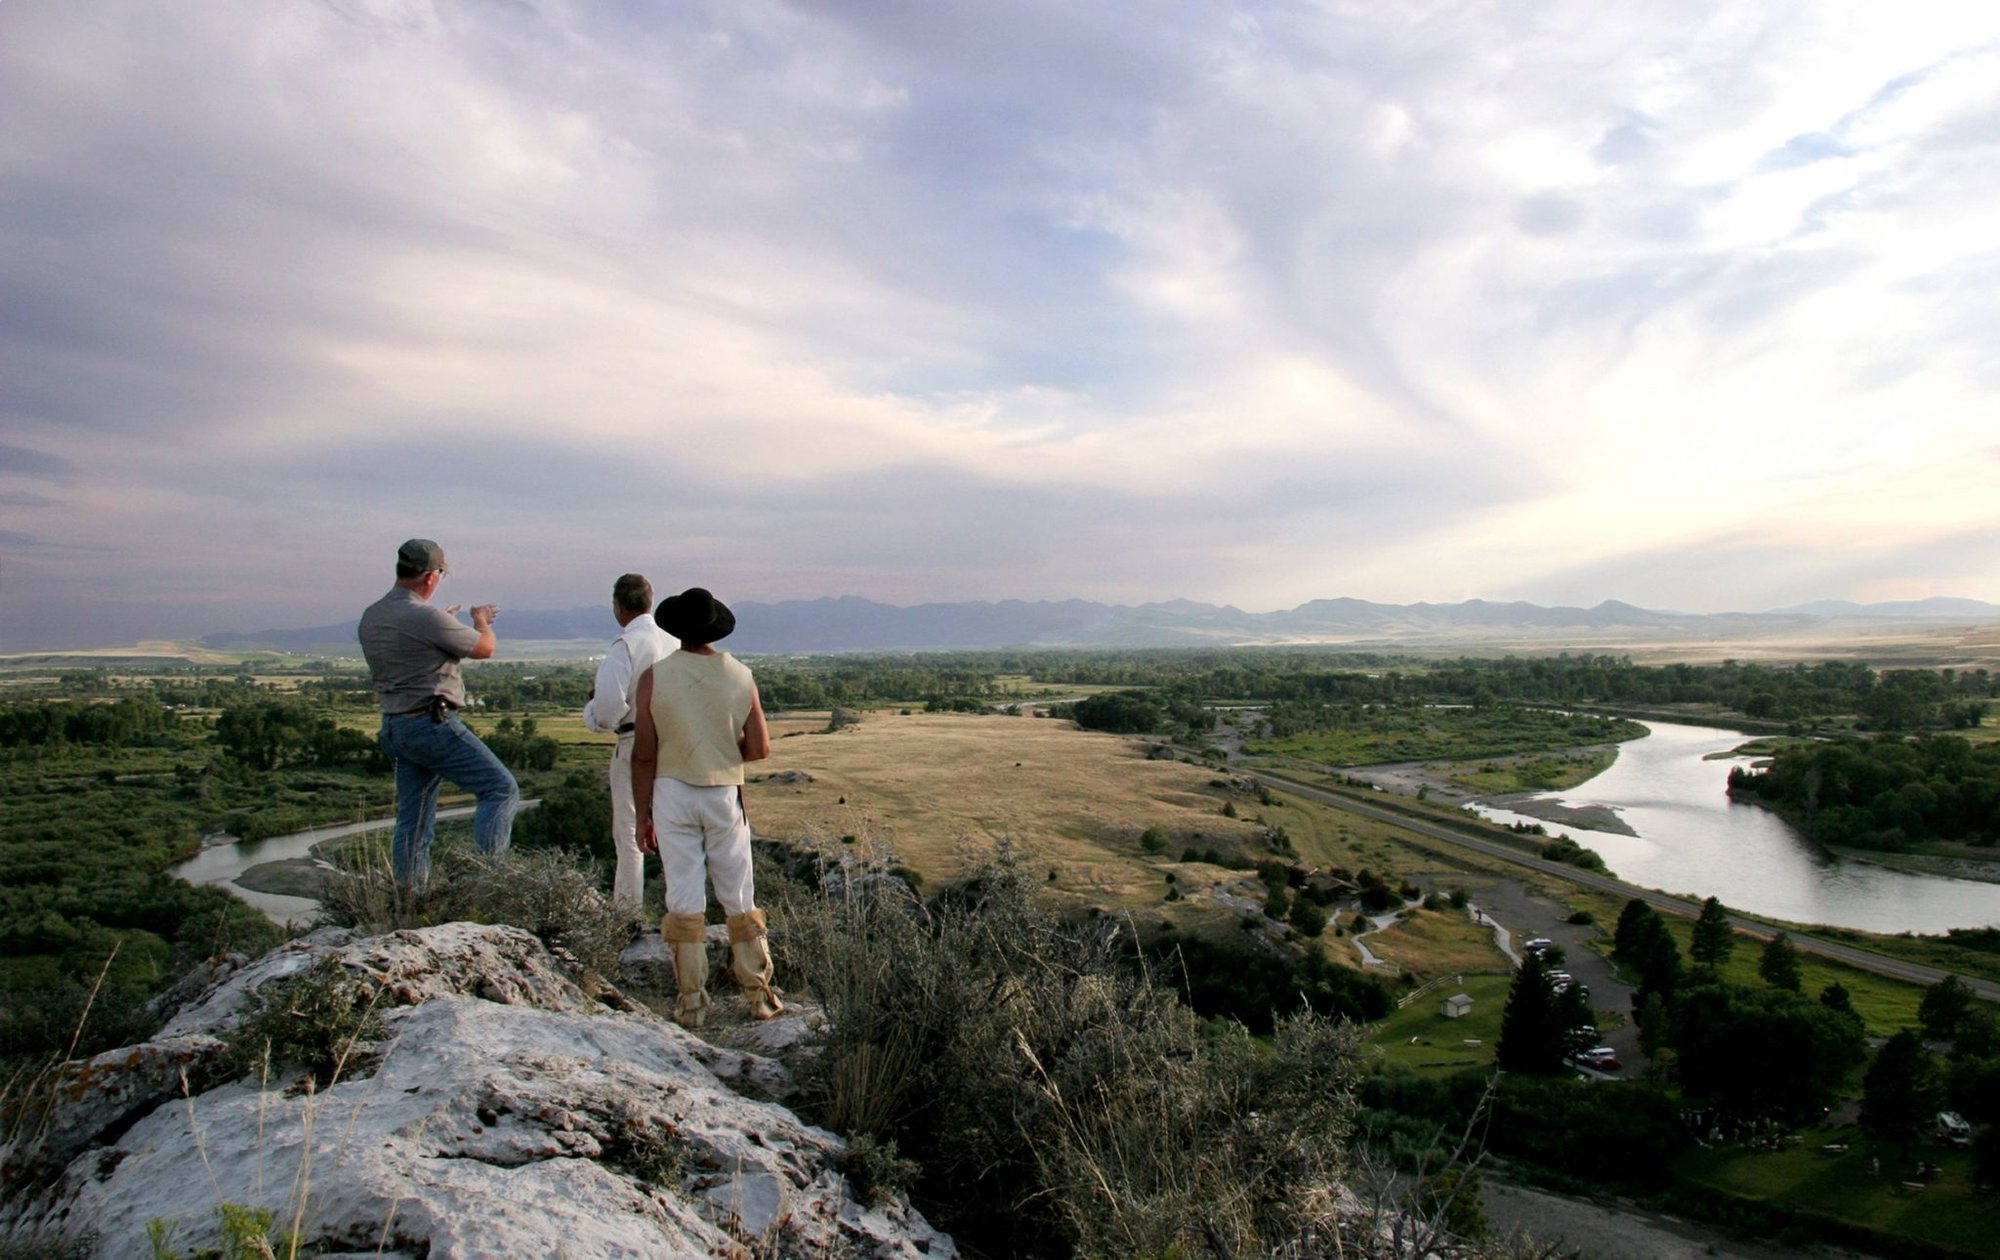 Headwaters State Park Manager Ray Heagney, left, gives a tour of the landscape from Lewis Rock on the evening of July 21, 2005. The combined Madison and Jefferson rivers, to the lower right, will soon be joined by the Gallatin River, to the left, to form the Missouri River in this primitive park near Three Forks, Montana. Heagney and park staff provided tours from the prominent rock, named after Capt. Meriwether Lewis, on the 200th anniversary of the Lewis and Clark Expedition passing through Three Forks. Photo courtesy of the National Parks Service.